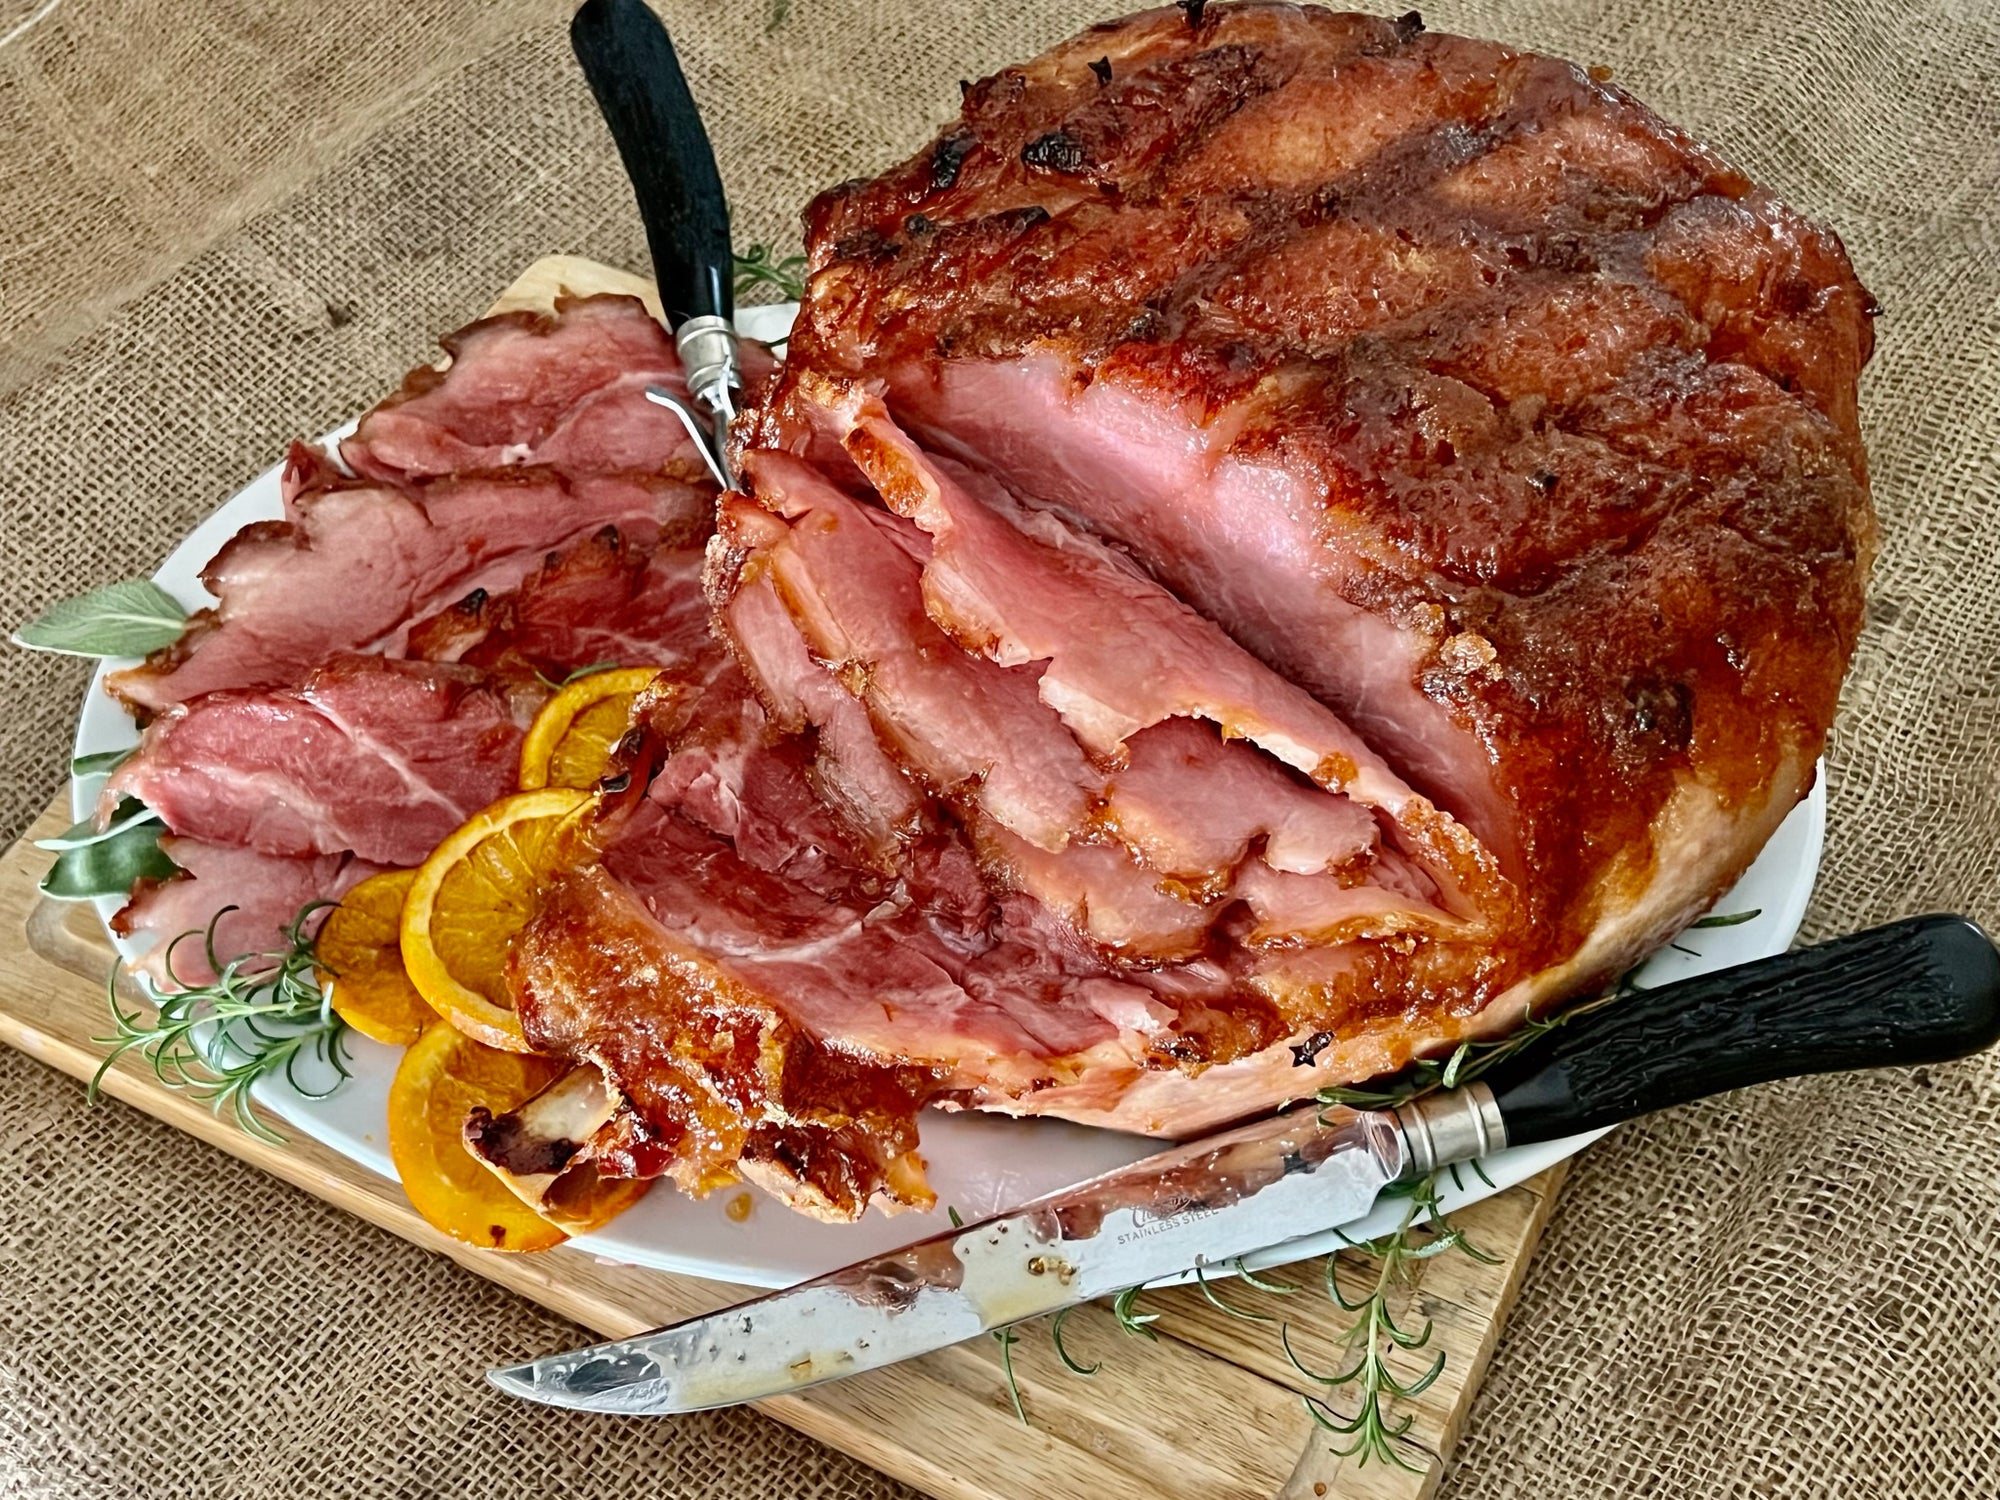 How to Bake a Country Ham